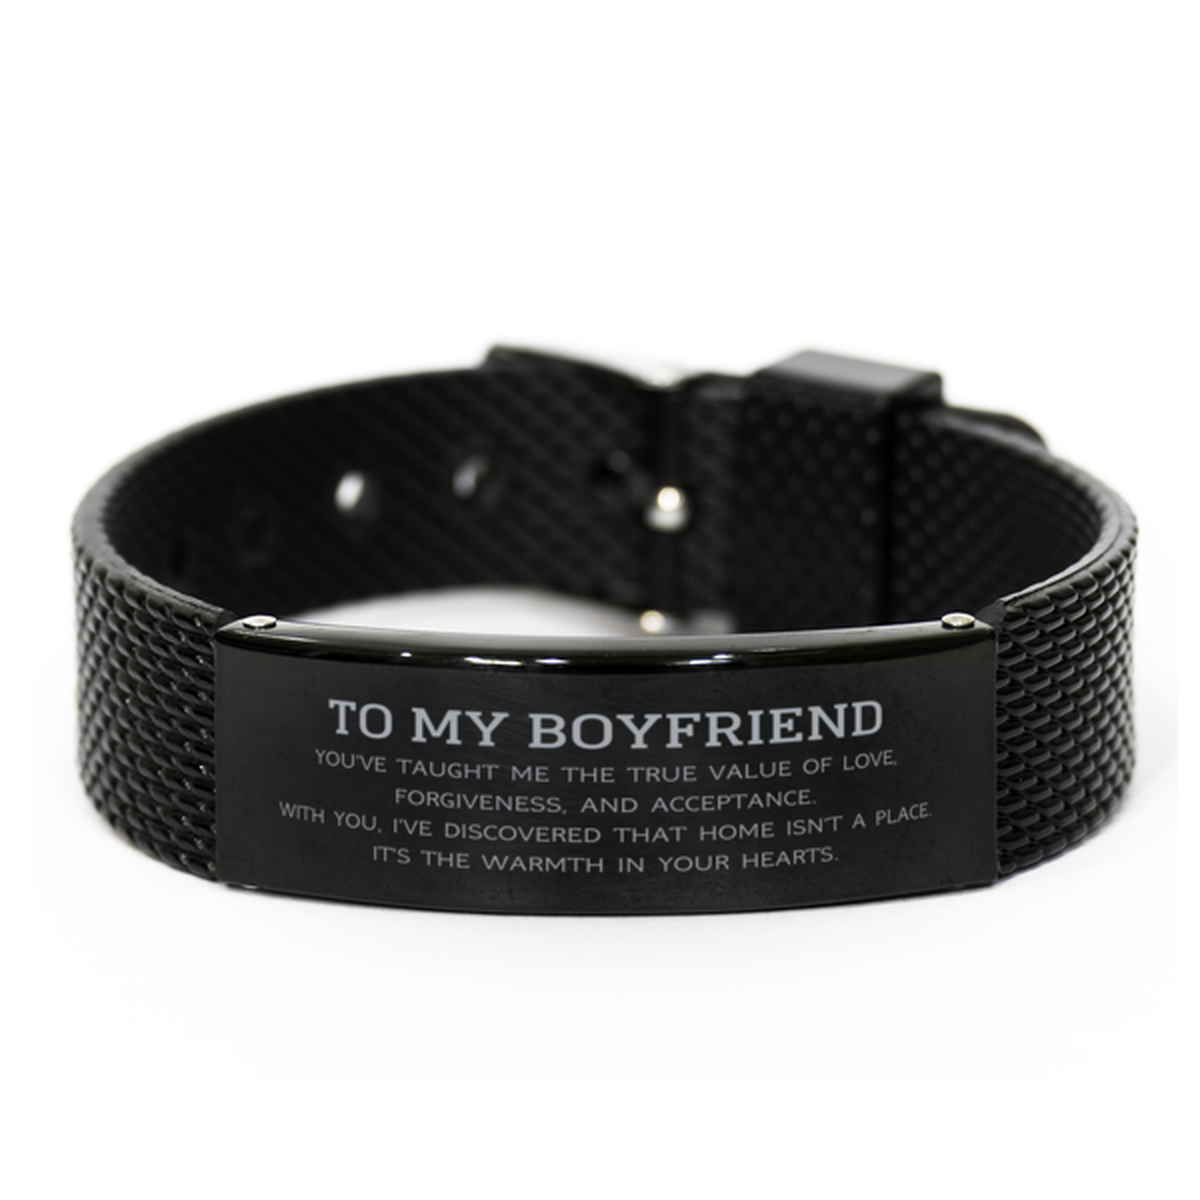 To My Boyfriend Gifts, You've taught me the true value of love, Thank You Gifts For Boyfriend, Birthday Black Shark Mesh Bracelet For Boyfriend